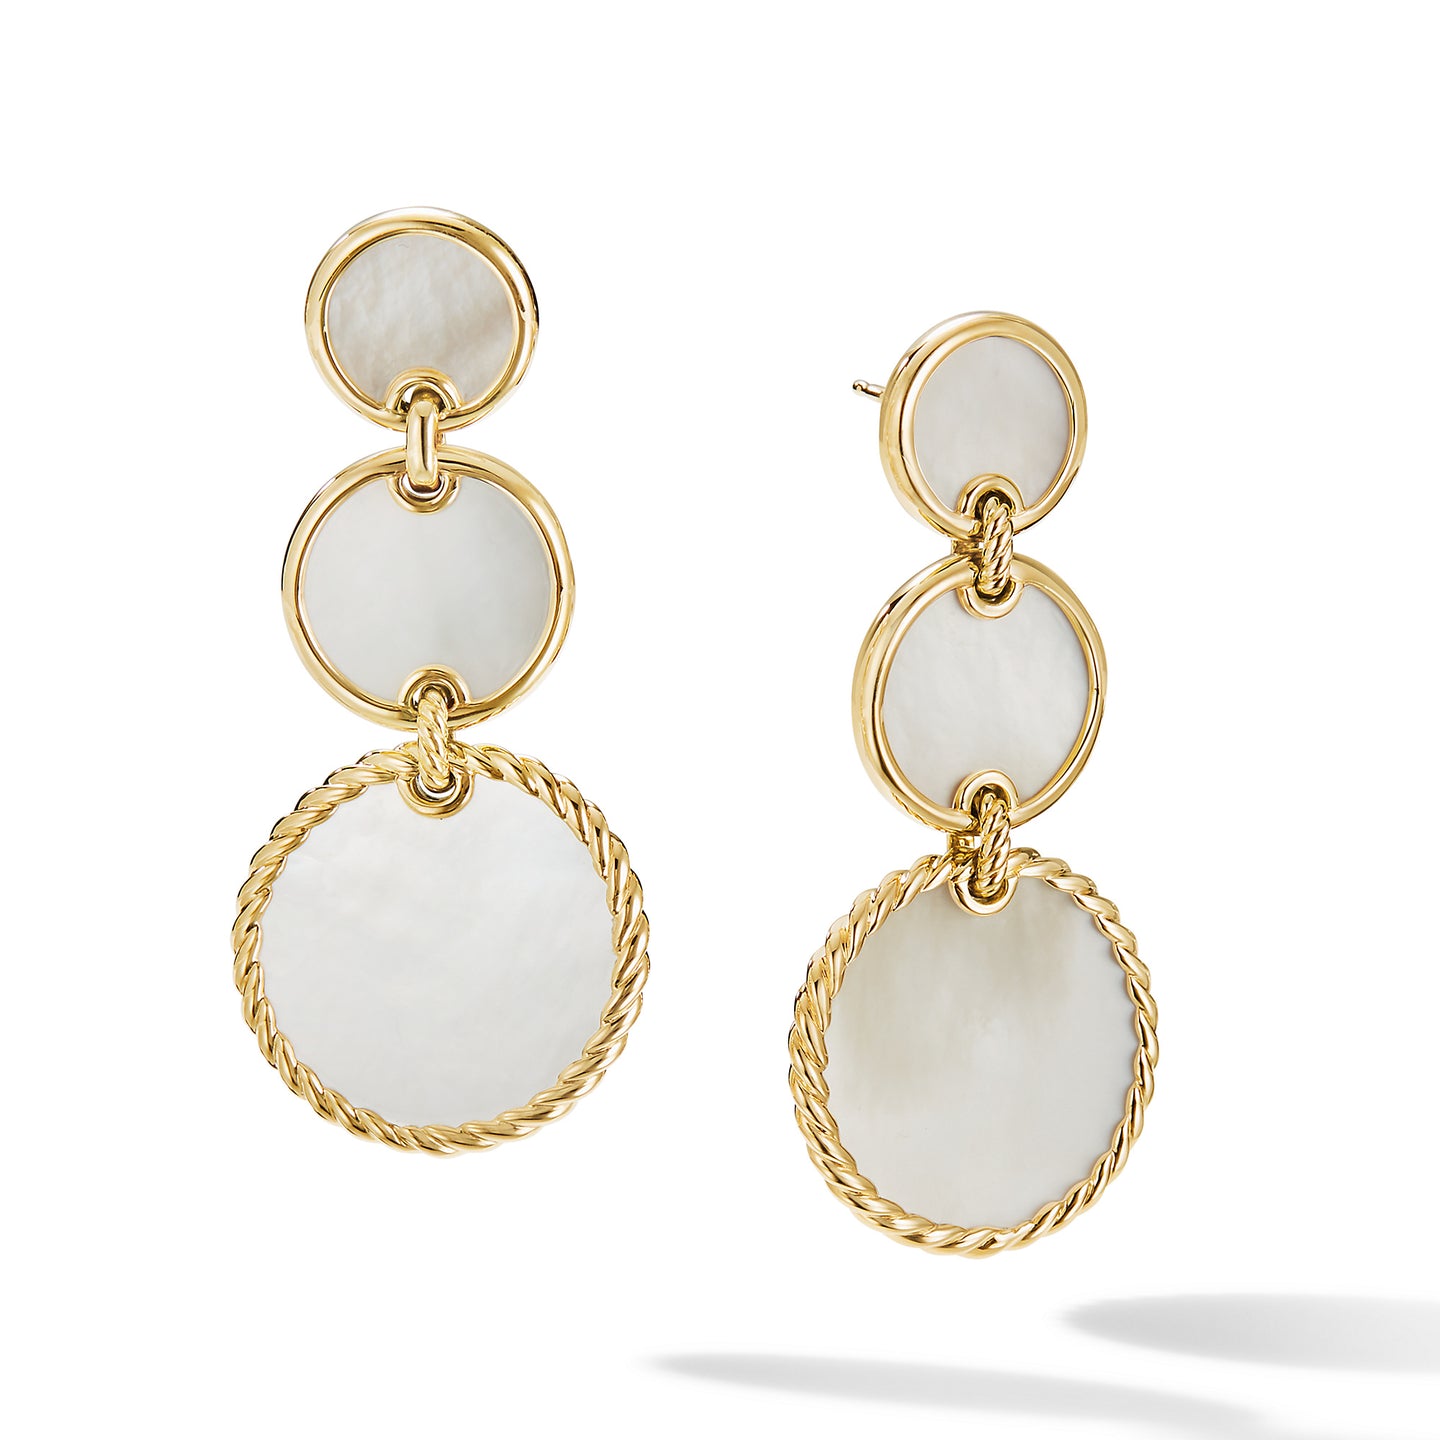 DY Elements® Triple Drop Earrings in 18K Yellow Gold with Mother of Pearl